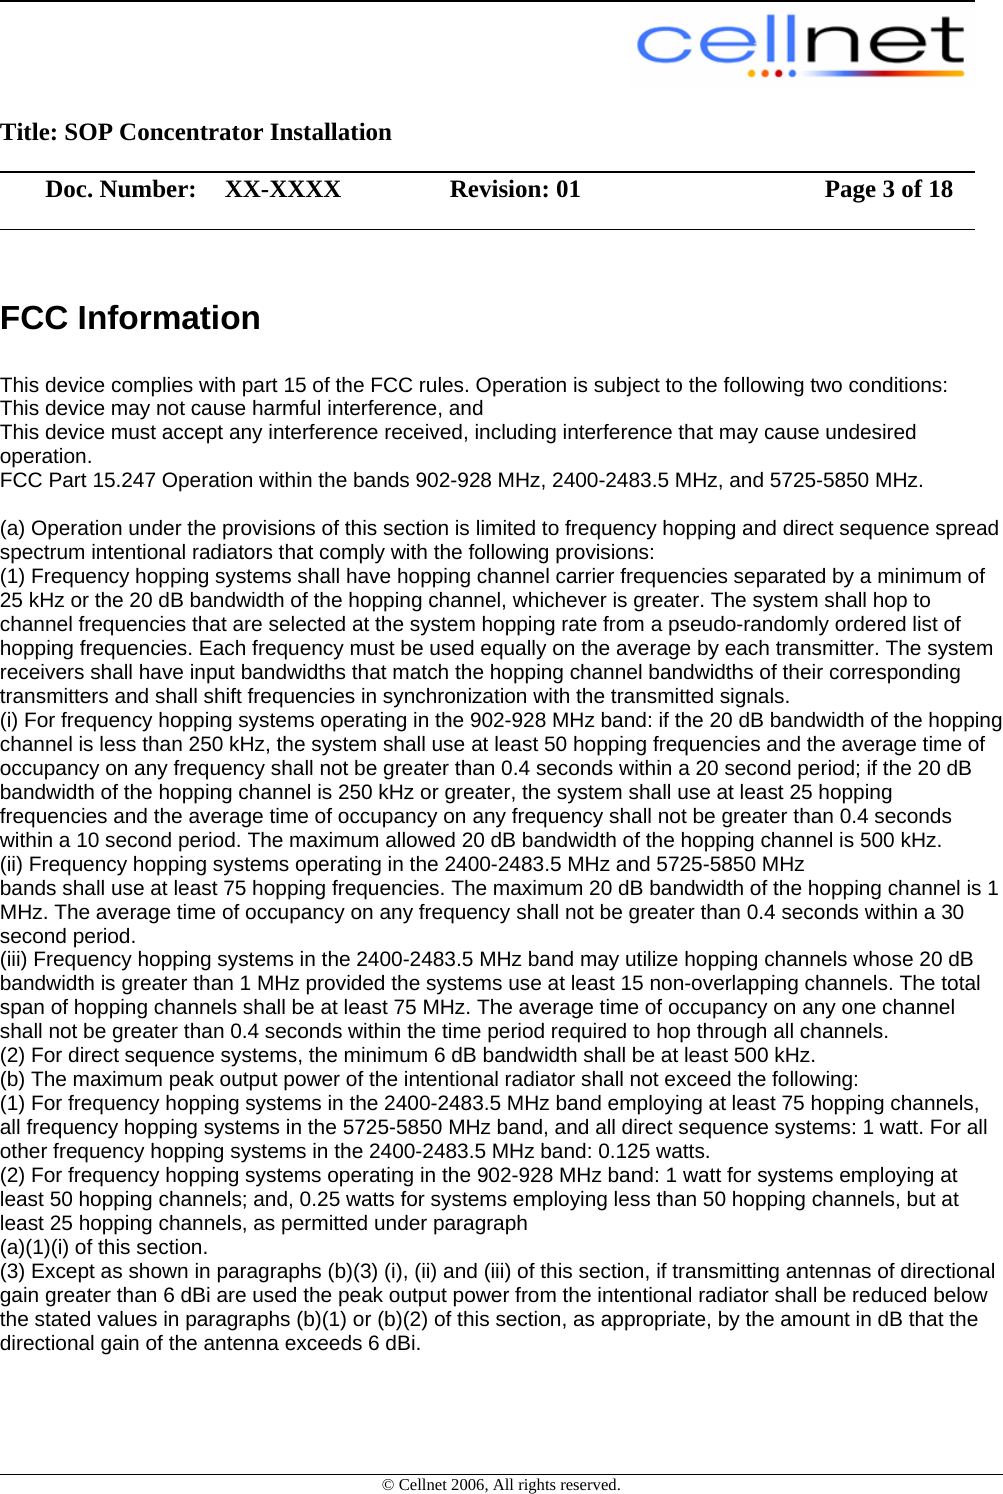                                                                                                         Title: SOP Concentrator Installation                  Doc. Number:  XX-XXXX             Revision: 01        Page 3 of 18                    © Cellnet 2006, All rights reserved. FCC Information           This device complies with part 15 of the FCC rules. Operation is subject to the following two conditions: This device may not cause harmful interference, and This device must accept any interference received, including interference that may cause undesired operation. FCC Part 15.247 Operation within the bands 902-928 MHz, 2400-2483.5 MHz, and 5725-5850 MHz.  (a) Operation under the provisions of this section is limited to frequency hopping and direct sequence spread spectrum intentional radiators that comply with the following provisions:  (1) Frequency hopping systems shall have hopping channel carrier frequencies separated by a minimum of 25 kHz or the 20 dB bandwidth of the hopping channel, whichever is greater. The system shall hop to channel frequencies that are selected at the system hopping rate from a pseudo-randomly ordered list of hopping frequencies. Each frequency must be used equally on the average by each transmitter. The system receivers shall have input bandwidths that match the hopping channel bandwidths of their corresponding transmitters and shall shift frequencies in synchronization with the transmitted signals. (i) For frequency hopping systems operating in the 902-928 MHz band: if the 20 dB bandwidth of the hopping channel is less than 250 kHz, the system shall use at least 50 hopping frequencies and the average time of occupancy on any frequency shall not be greater than 0.4 seconds within a 20 second period; if the 20 dB bandwidth of the hopping channel is 250 kHz or greater, the system shall use at least 25 hopping frequencies and the average time of occupancy on any frequency shall not be greater than 0.4 seconds within a 10 second period. The maximum allowed 20 dB bandwidth of the hopping channel is 500 kHz. (ii) Frequency hopping systems operating in the 2400-2483.5 MHz and 5725-5850 MHz bands shall use at least 75 hopping frequencies. The maximum 20 dB bandwidth of the hopping channel is 1 MHz. The average time of occupancy on any frequency shall not be greater than 0.4 seconds within a 30 second period.  (iii) Frequency hopping systems in the 2400-2483.5 MHz band may utilize hopping channels whose 20 dB bandwidth is greater than 1 MHz provided the systems use at least 15 non-overlapping channels. The total span of hopping channels shall be at least 75 MHz. The average time of occupancy on any one channel shall not be greater than 0.4 seconds within the time period required to hop through all channels. (2) For direct sequence systems, the minimum 6 dB bandwidth shall be at least 500 kHz. (b) The maximum peak output power of the intentional radiator shall not exceed the following: (1) For frequency hopping systems in the 2400-2483.5 MHz band employing at least 75 hopping channels, all frequency hopping systems in the 5725-5850 MHz band, and all direct sequence systems: 1 watt. For all other frequency hopping systems in the 2400-2483.5 MHz band: 0.125 watts. (2) For frequency hopping systems operating in the 902-928 MHz band: 1 watt for systems employing at least 50 hopping channels; and, 0.25 watts for systems employing less than 50 hopping channels, but at least 25 hopping channels, as permitted under paragraph (a)(1)(i) of this section. (3) Except as shown in paragraphs (b)(3) (i), (ii) and (iii) of this section, if transmitting antennas of directional gain greater than 6 dBi are used the peak output power from the intentional radiator shall be reduced below the stated values in paragraphs (b)(1) or (b)(2) of this section, as appropriate, by the amount in dB that the directional gain of the antenna exceeds 6 dBi. 